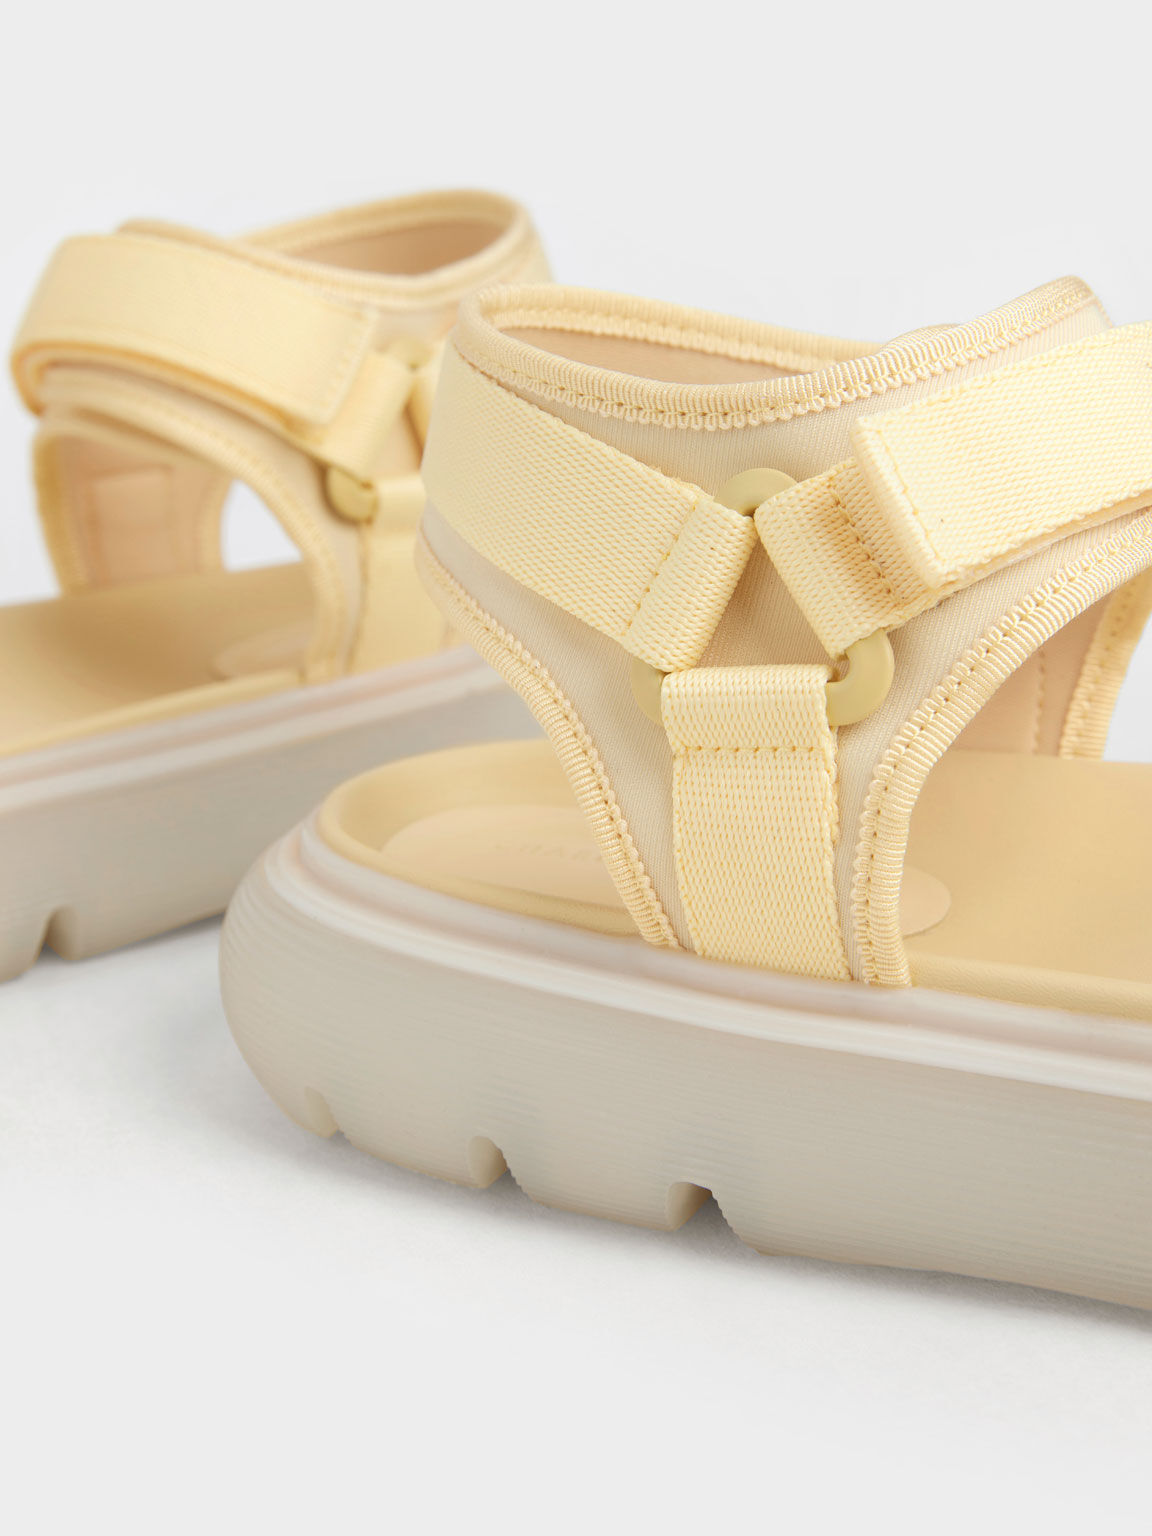 Recycled Polyester Velcro-Strap Sports Sandals, Yellow, hi-res